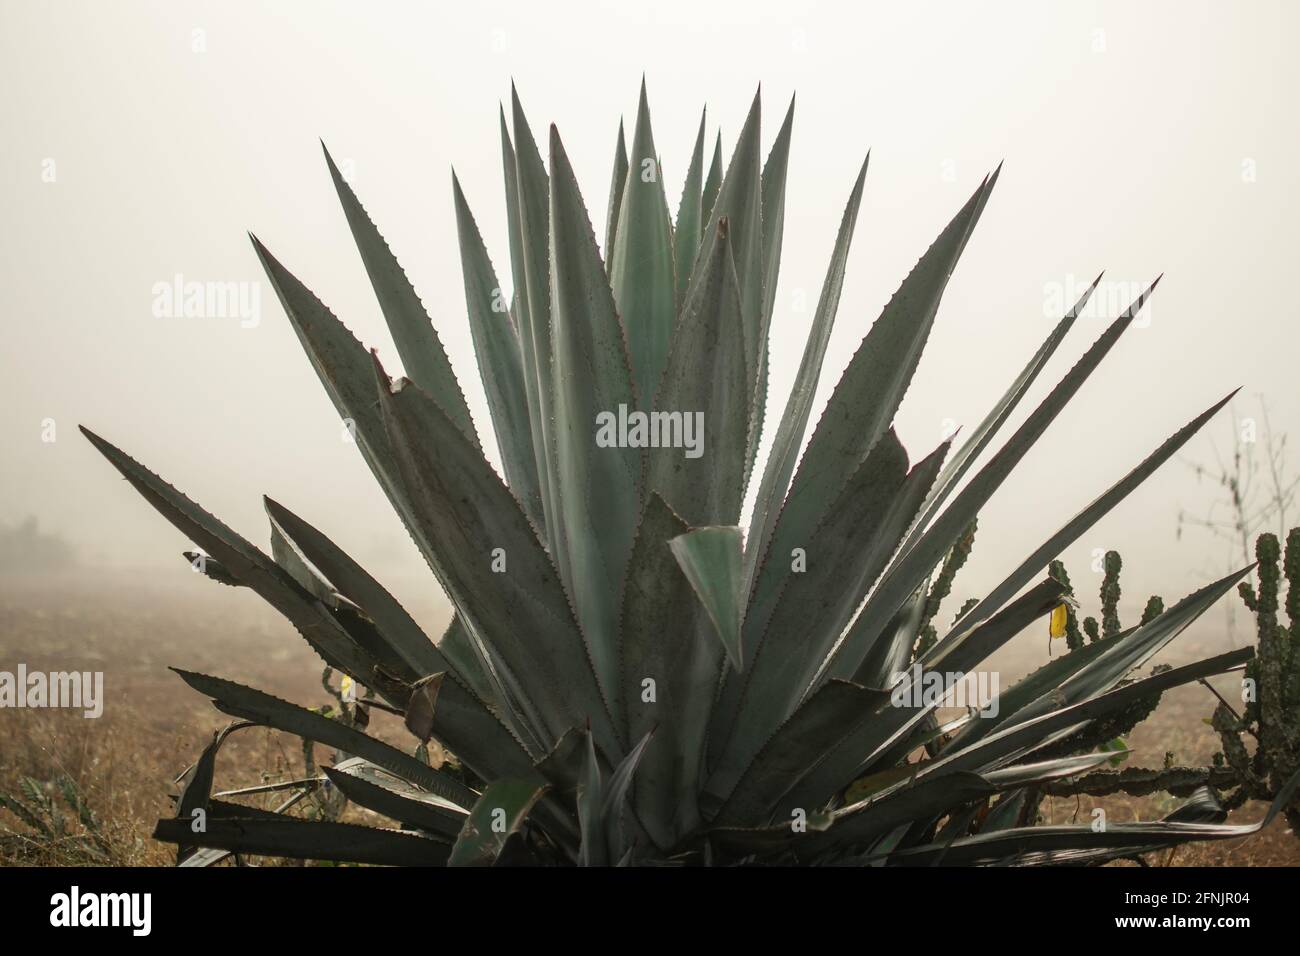 A single agave plant standing on a farm field in the heavy early morning mist between Kalaw and Inle Lake, Shan state, Myanmar Stock Photo